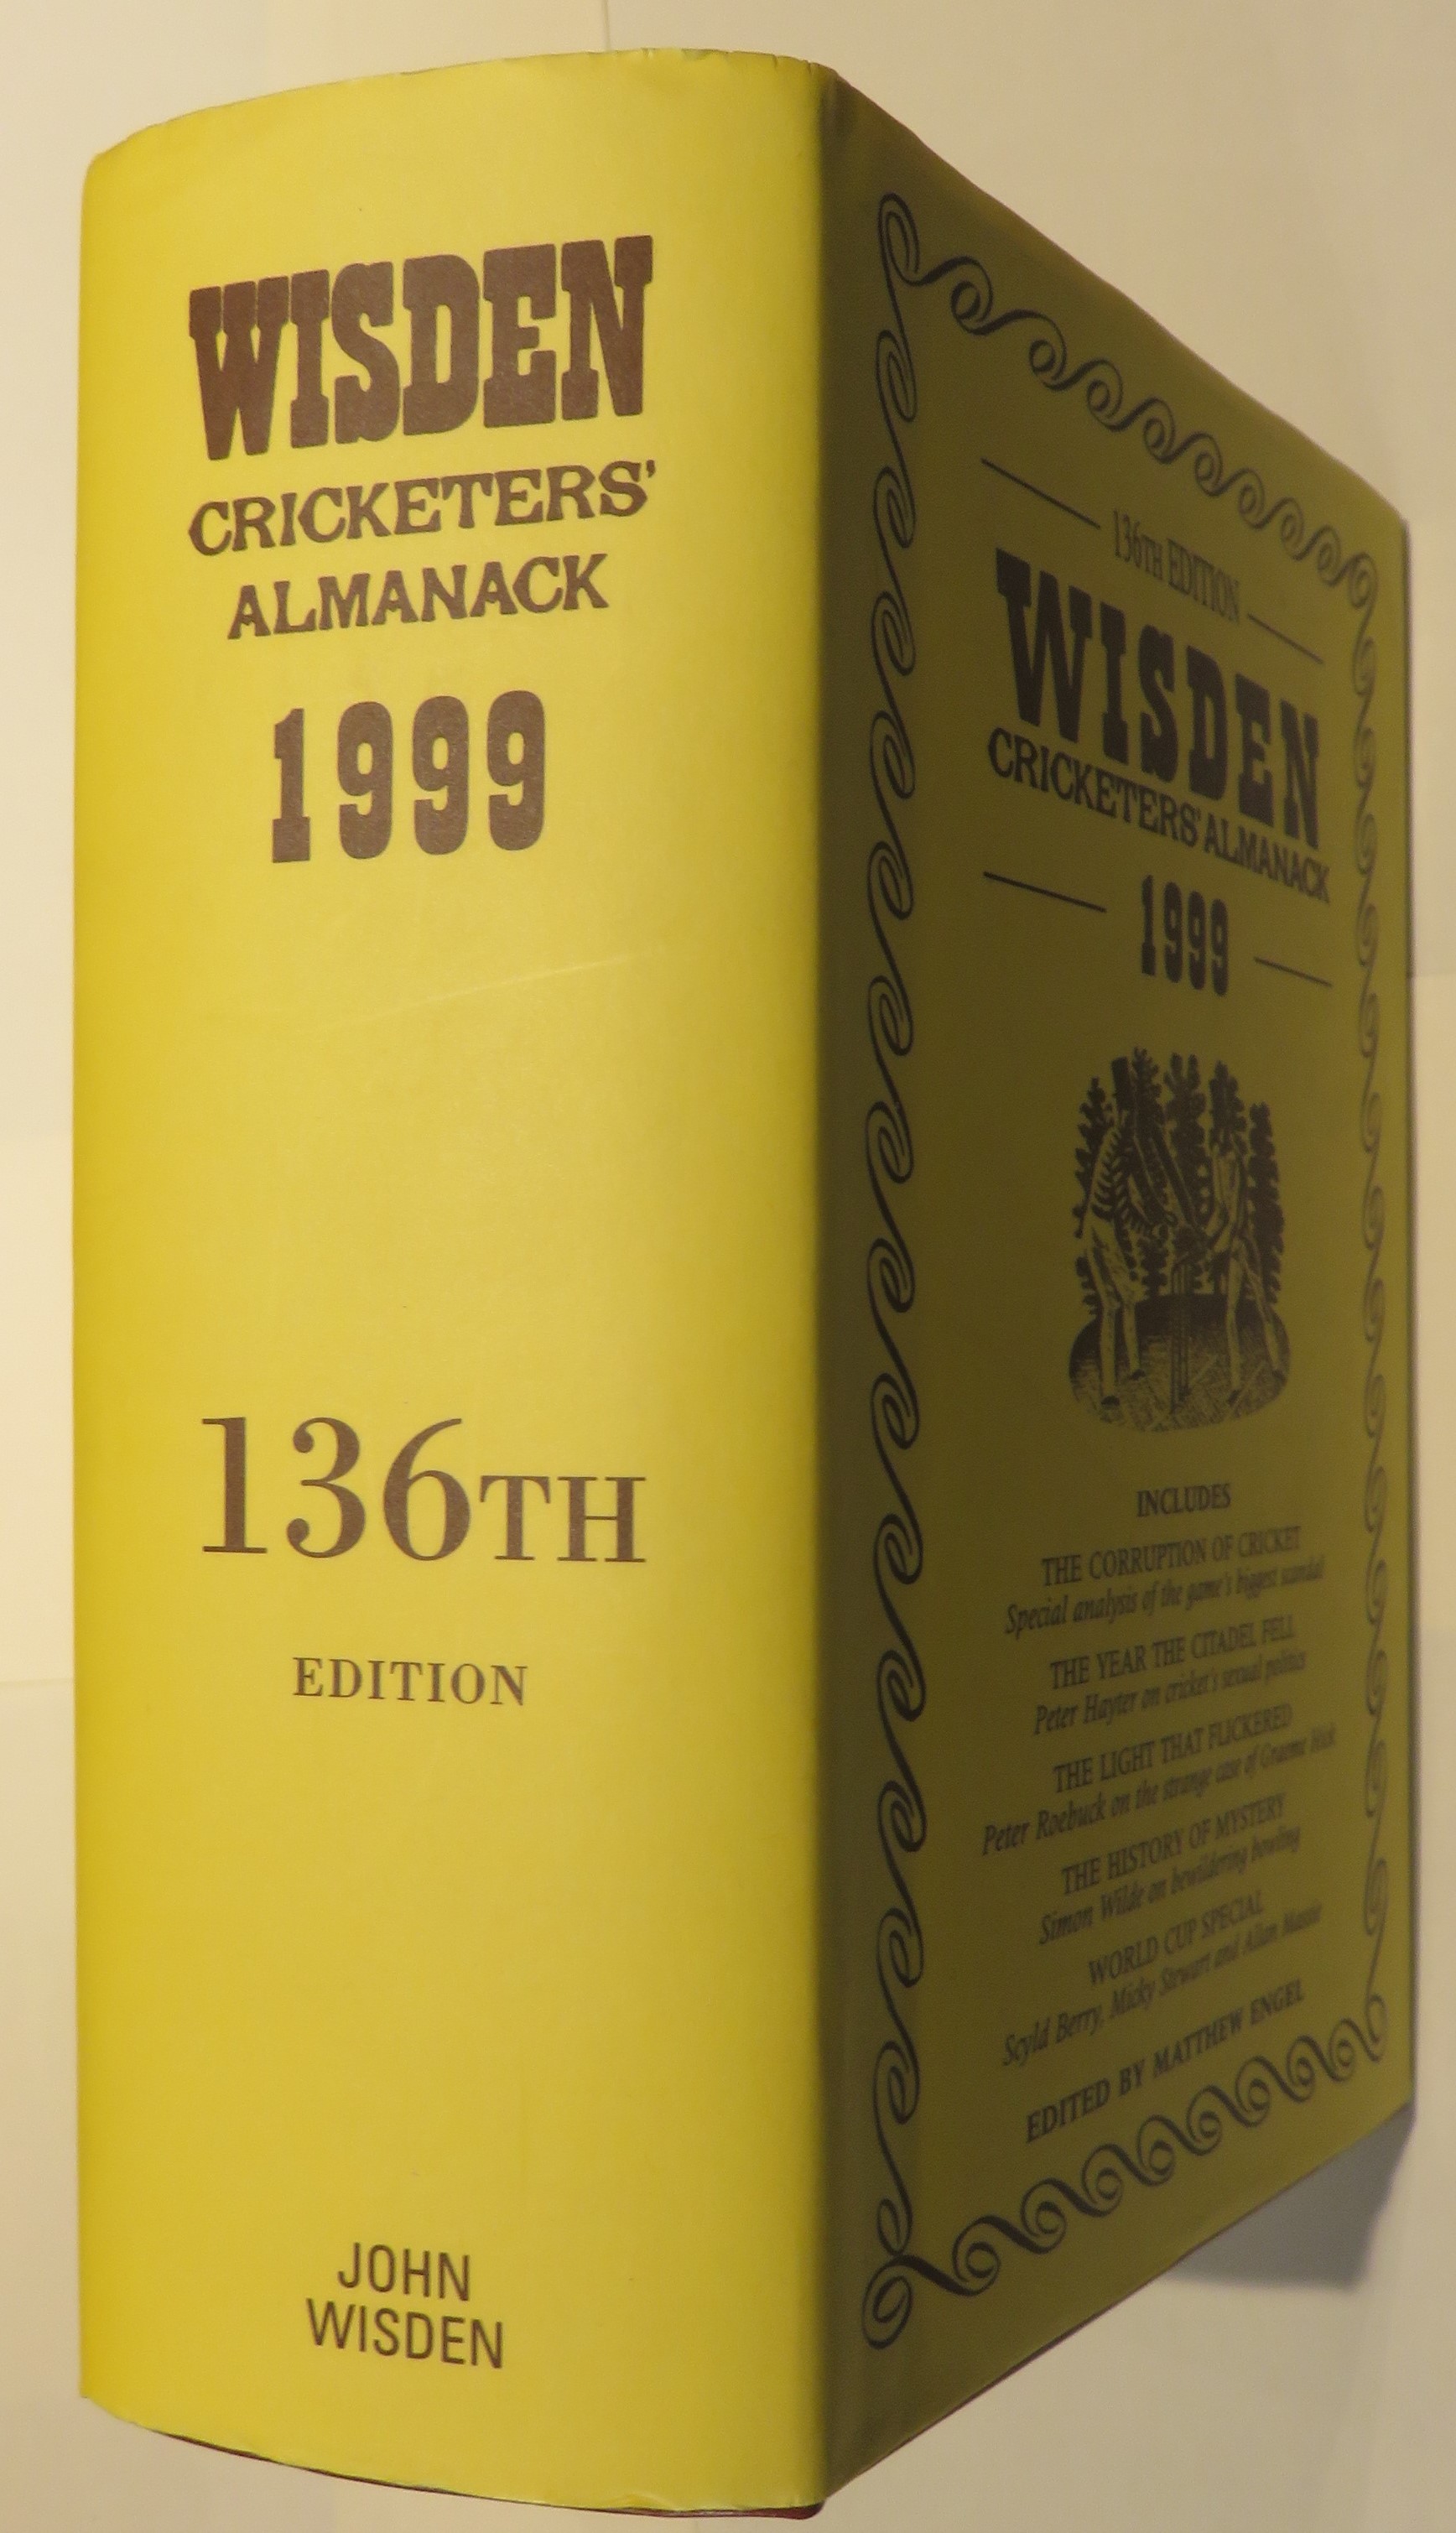 Wisden Cricketers' Almanack for the year 1999